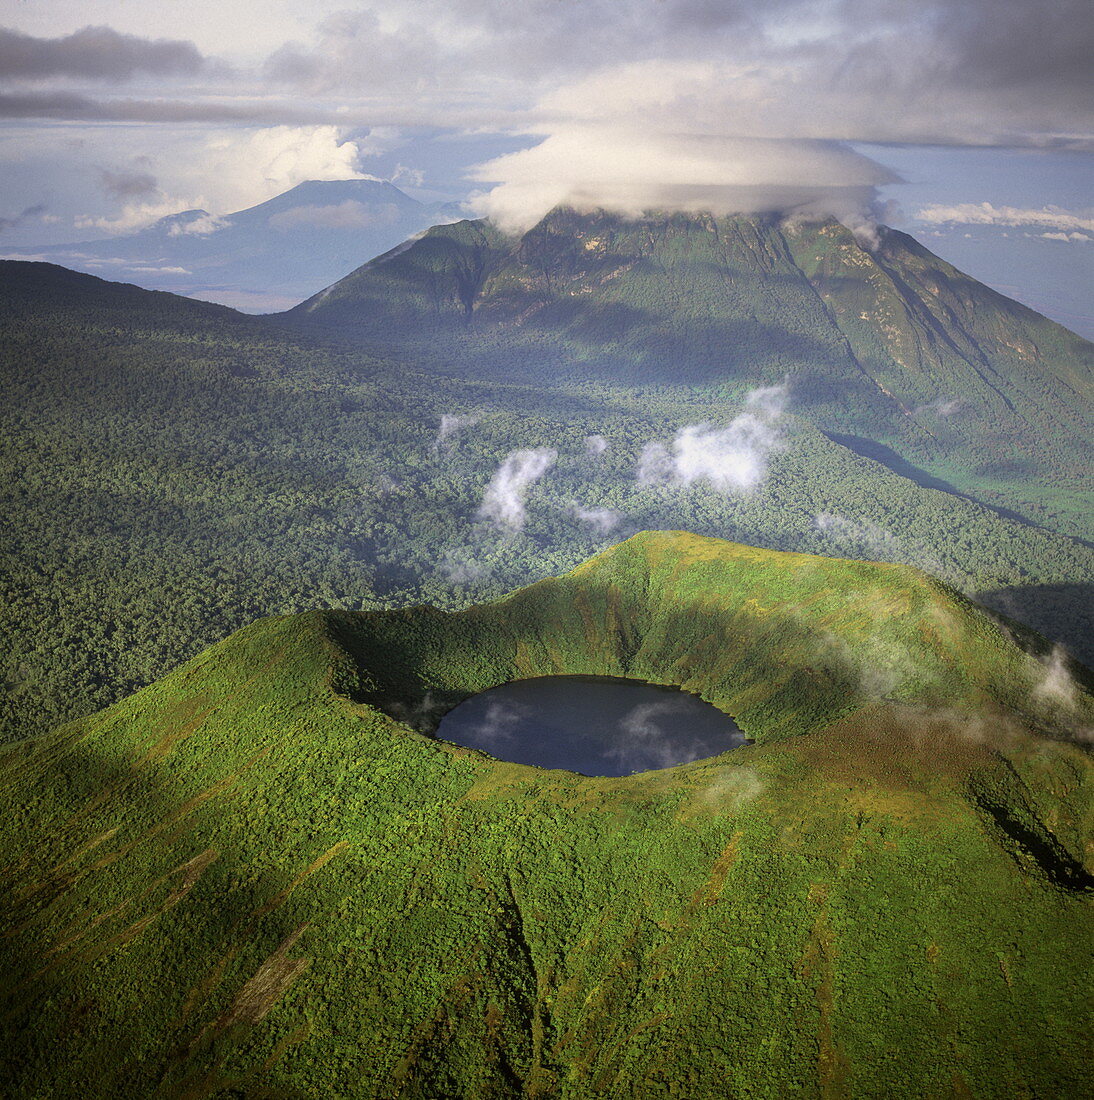 Aerial view of Mount Visoke (Mount Bisoke), an extinct volcano straddling the border of Rwanda and Democratic Republic of the Congo (DRC) showing crater lake, with Mount Mikeno in background, Virunga Volcanoes, Great Rift Valley, Africa